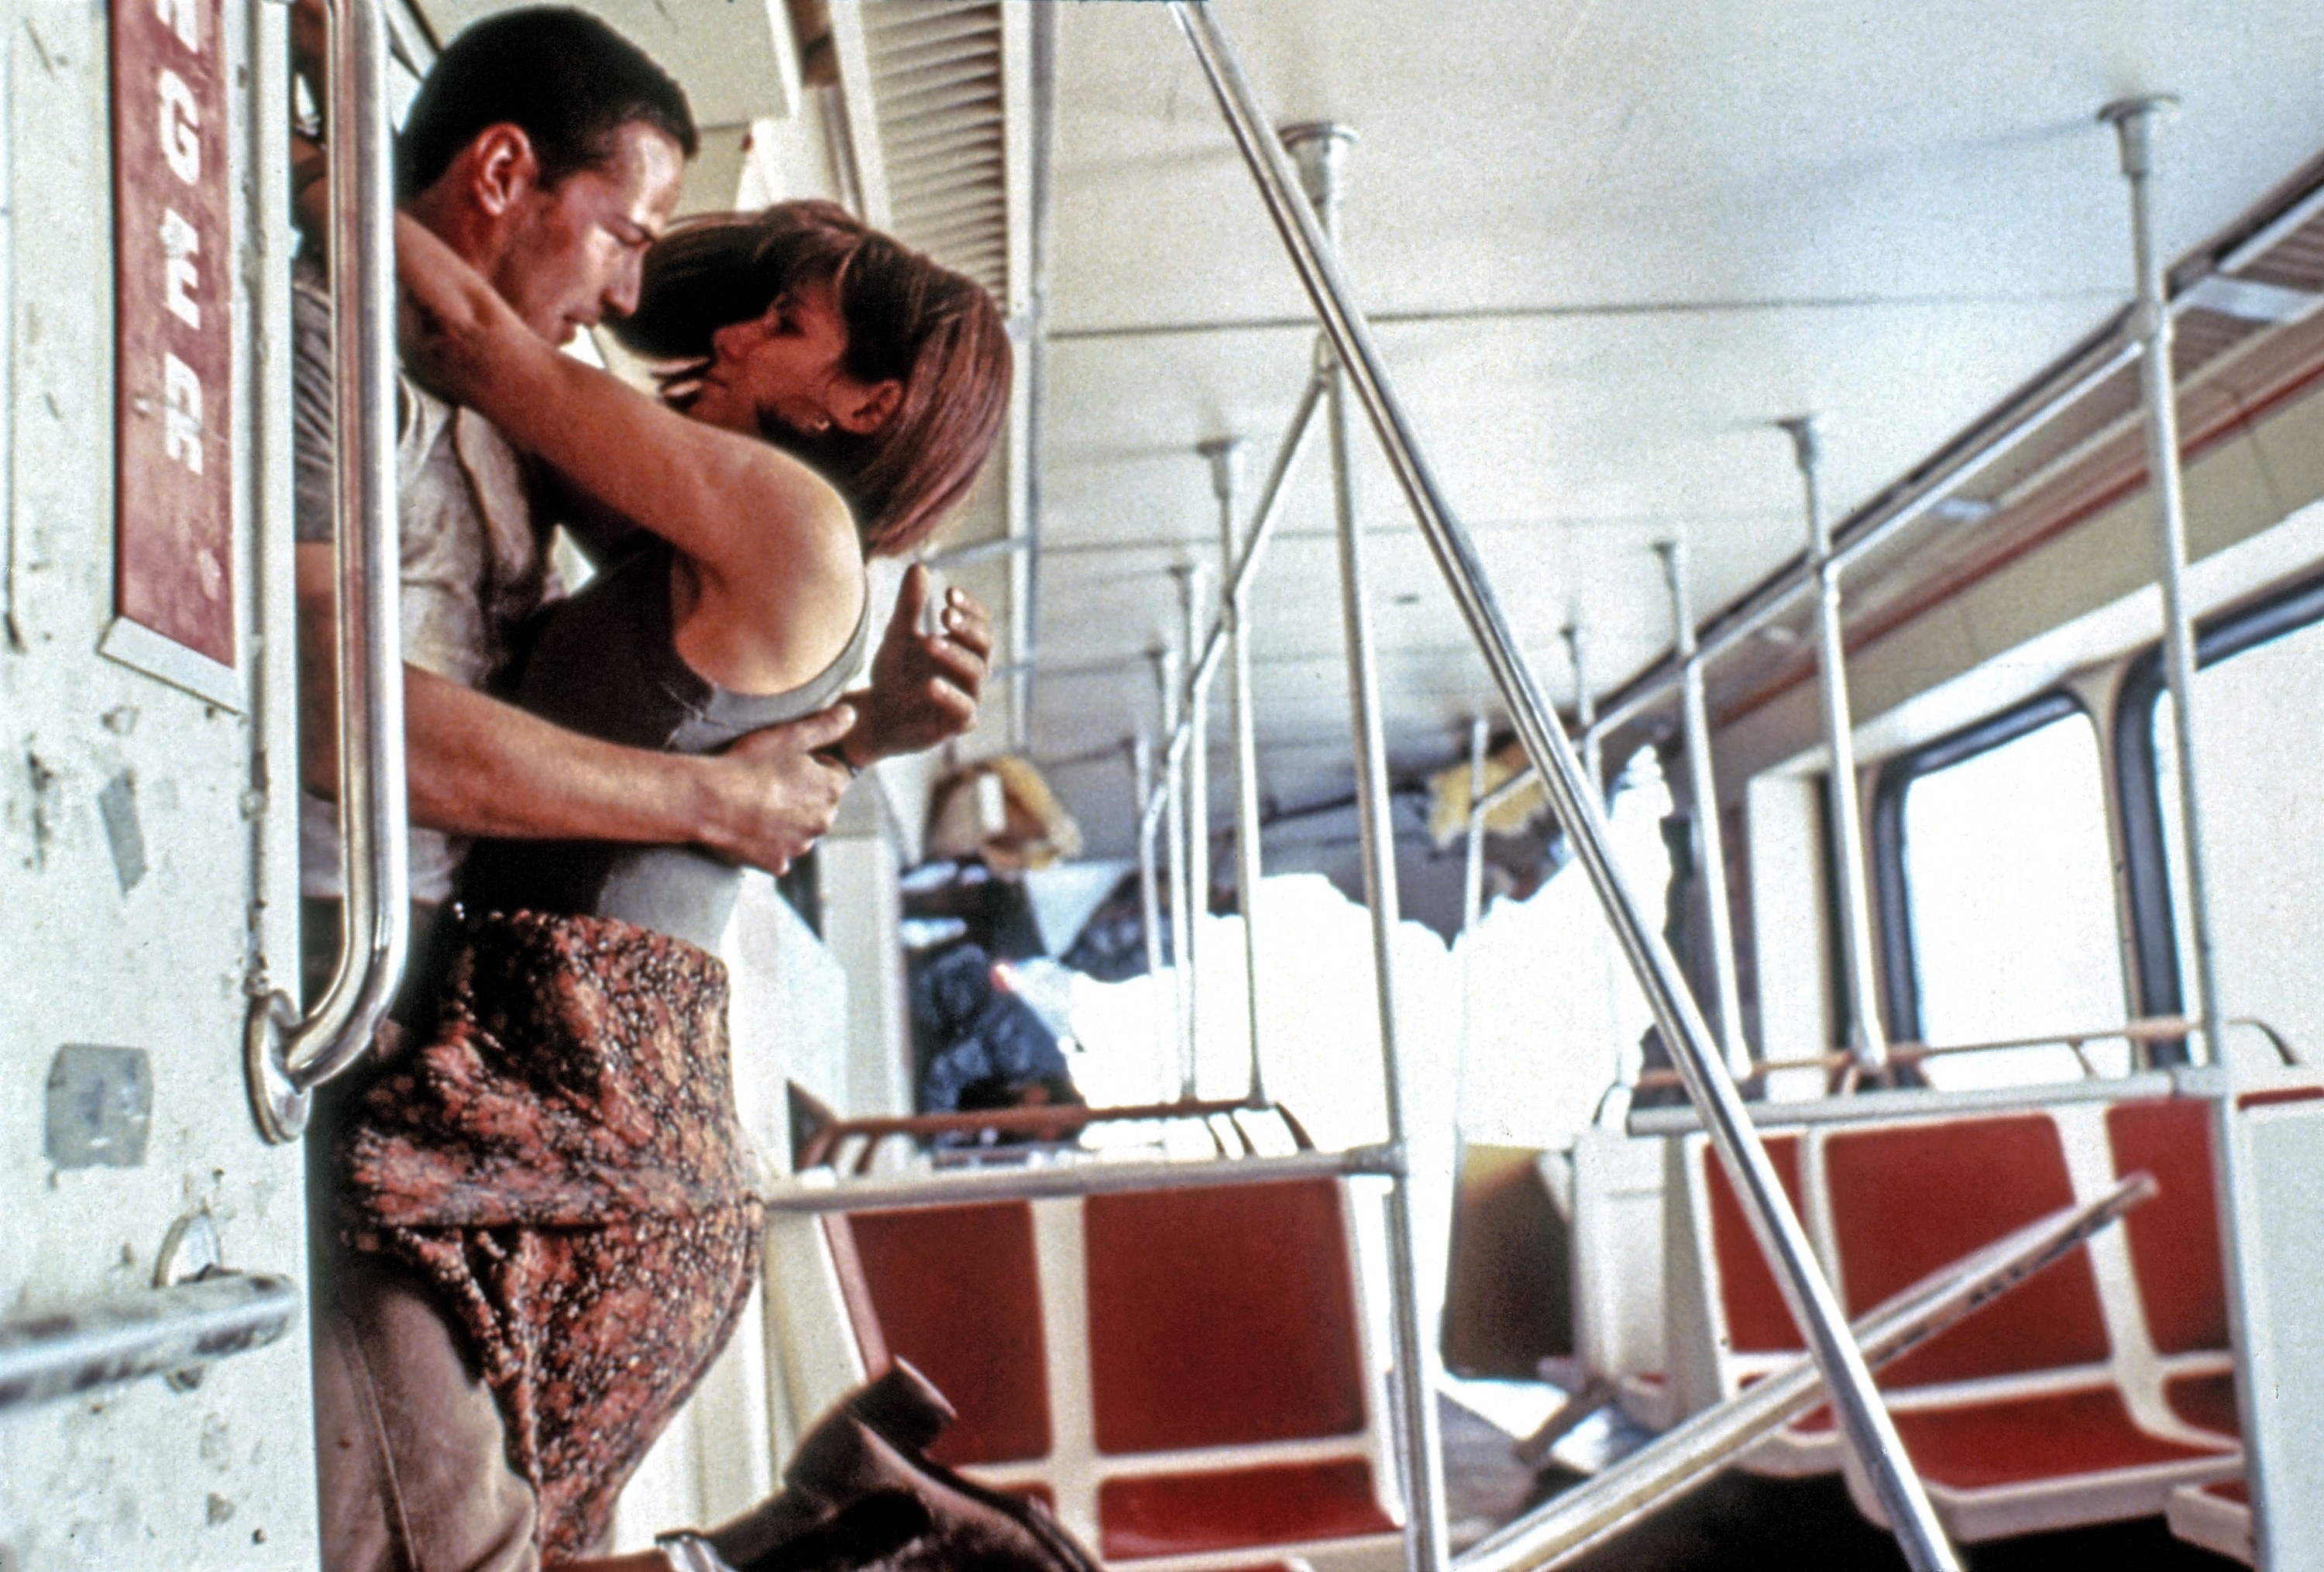 Keanu and Sandra embracing in a scene from Speed